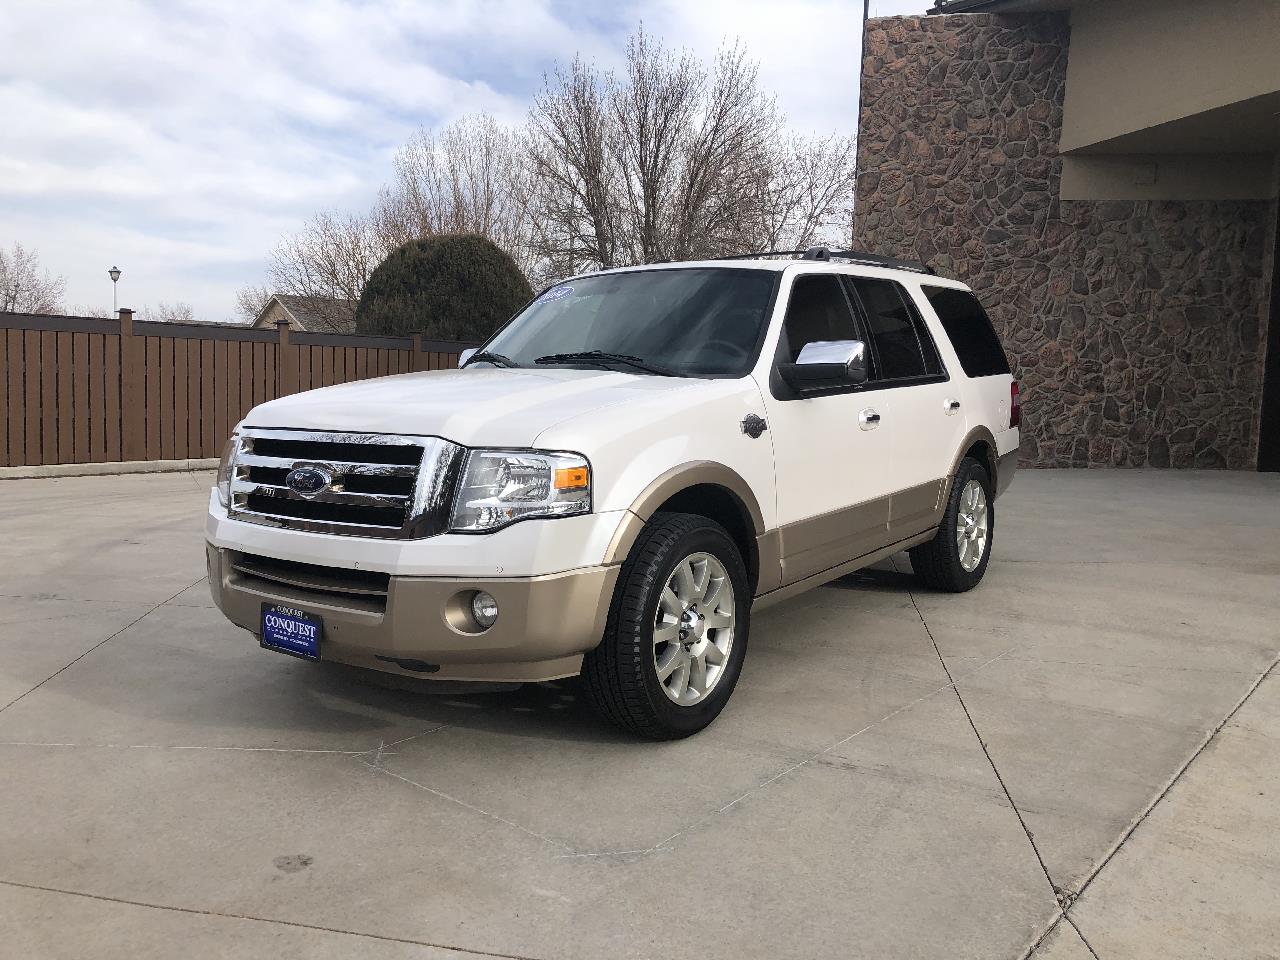 2014 Ford Expedition for sale in Greeley, CO